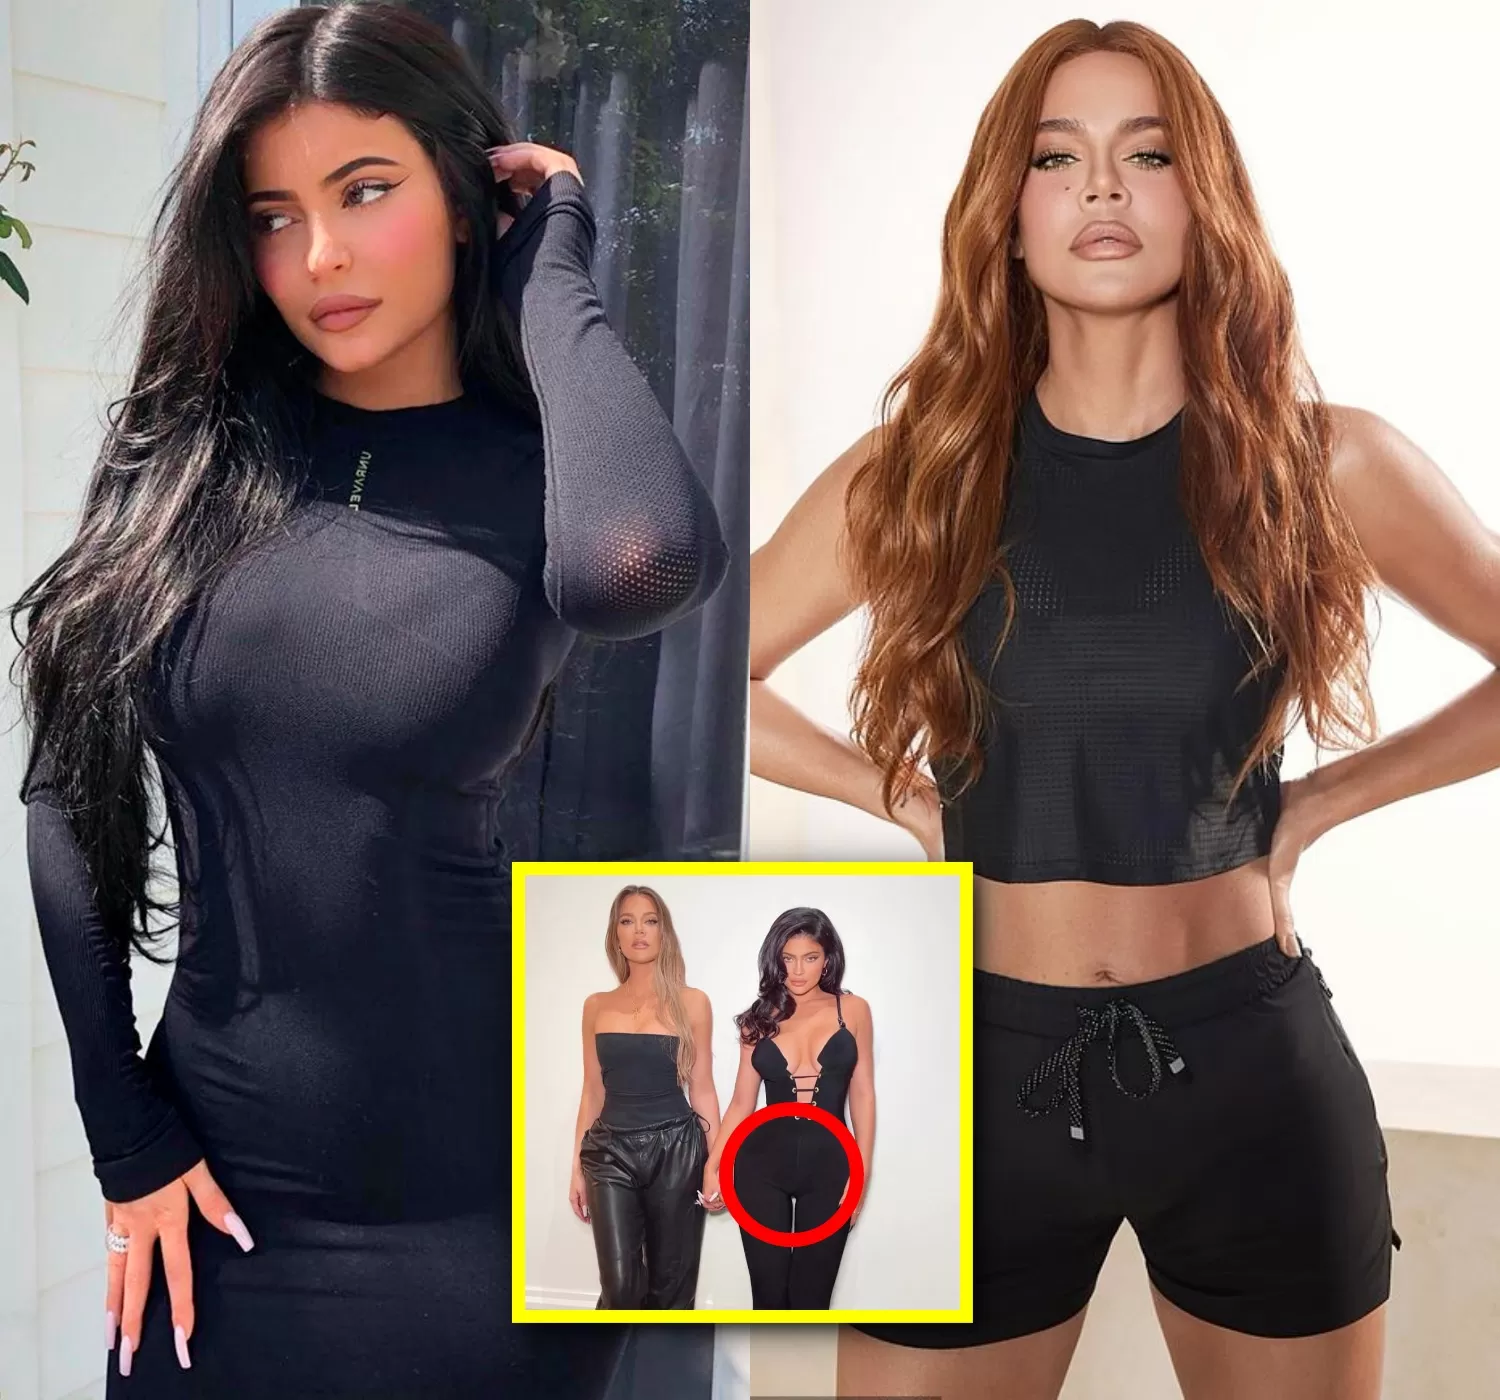 Cover Image for Kylie Jenner Before Surgical Enhancements: Khloe Kardashian Reveals Unseen Photo